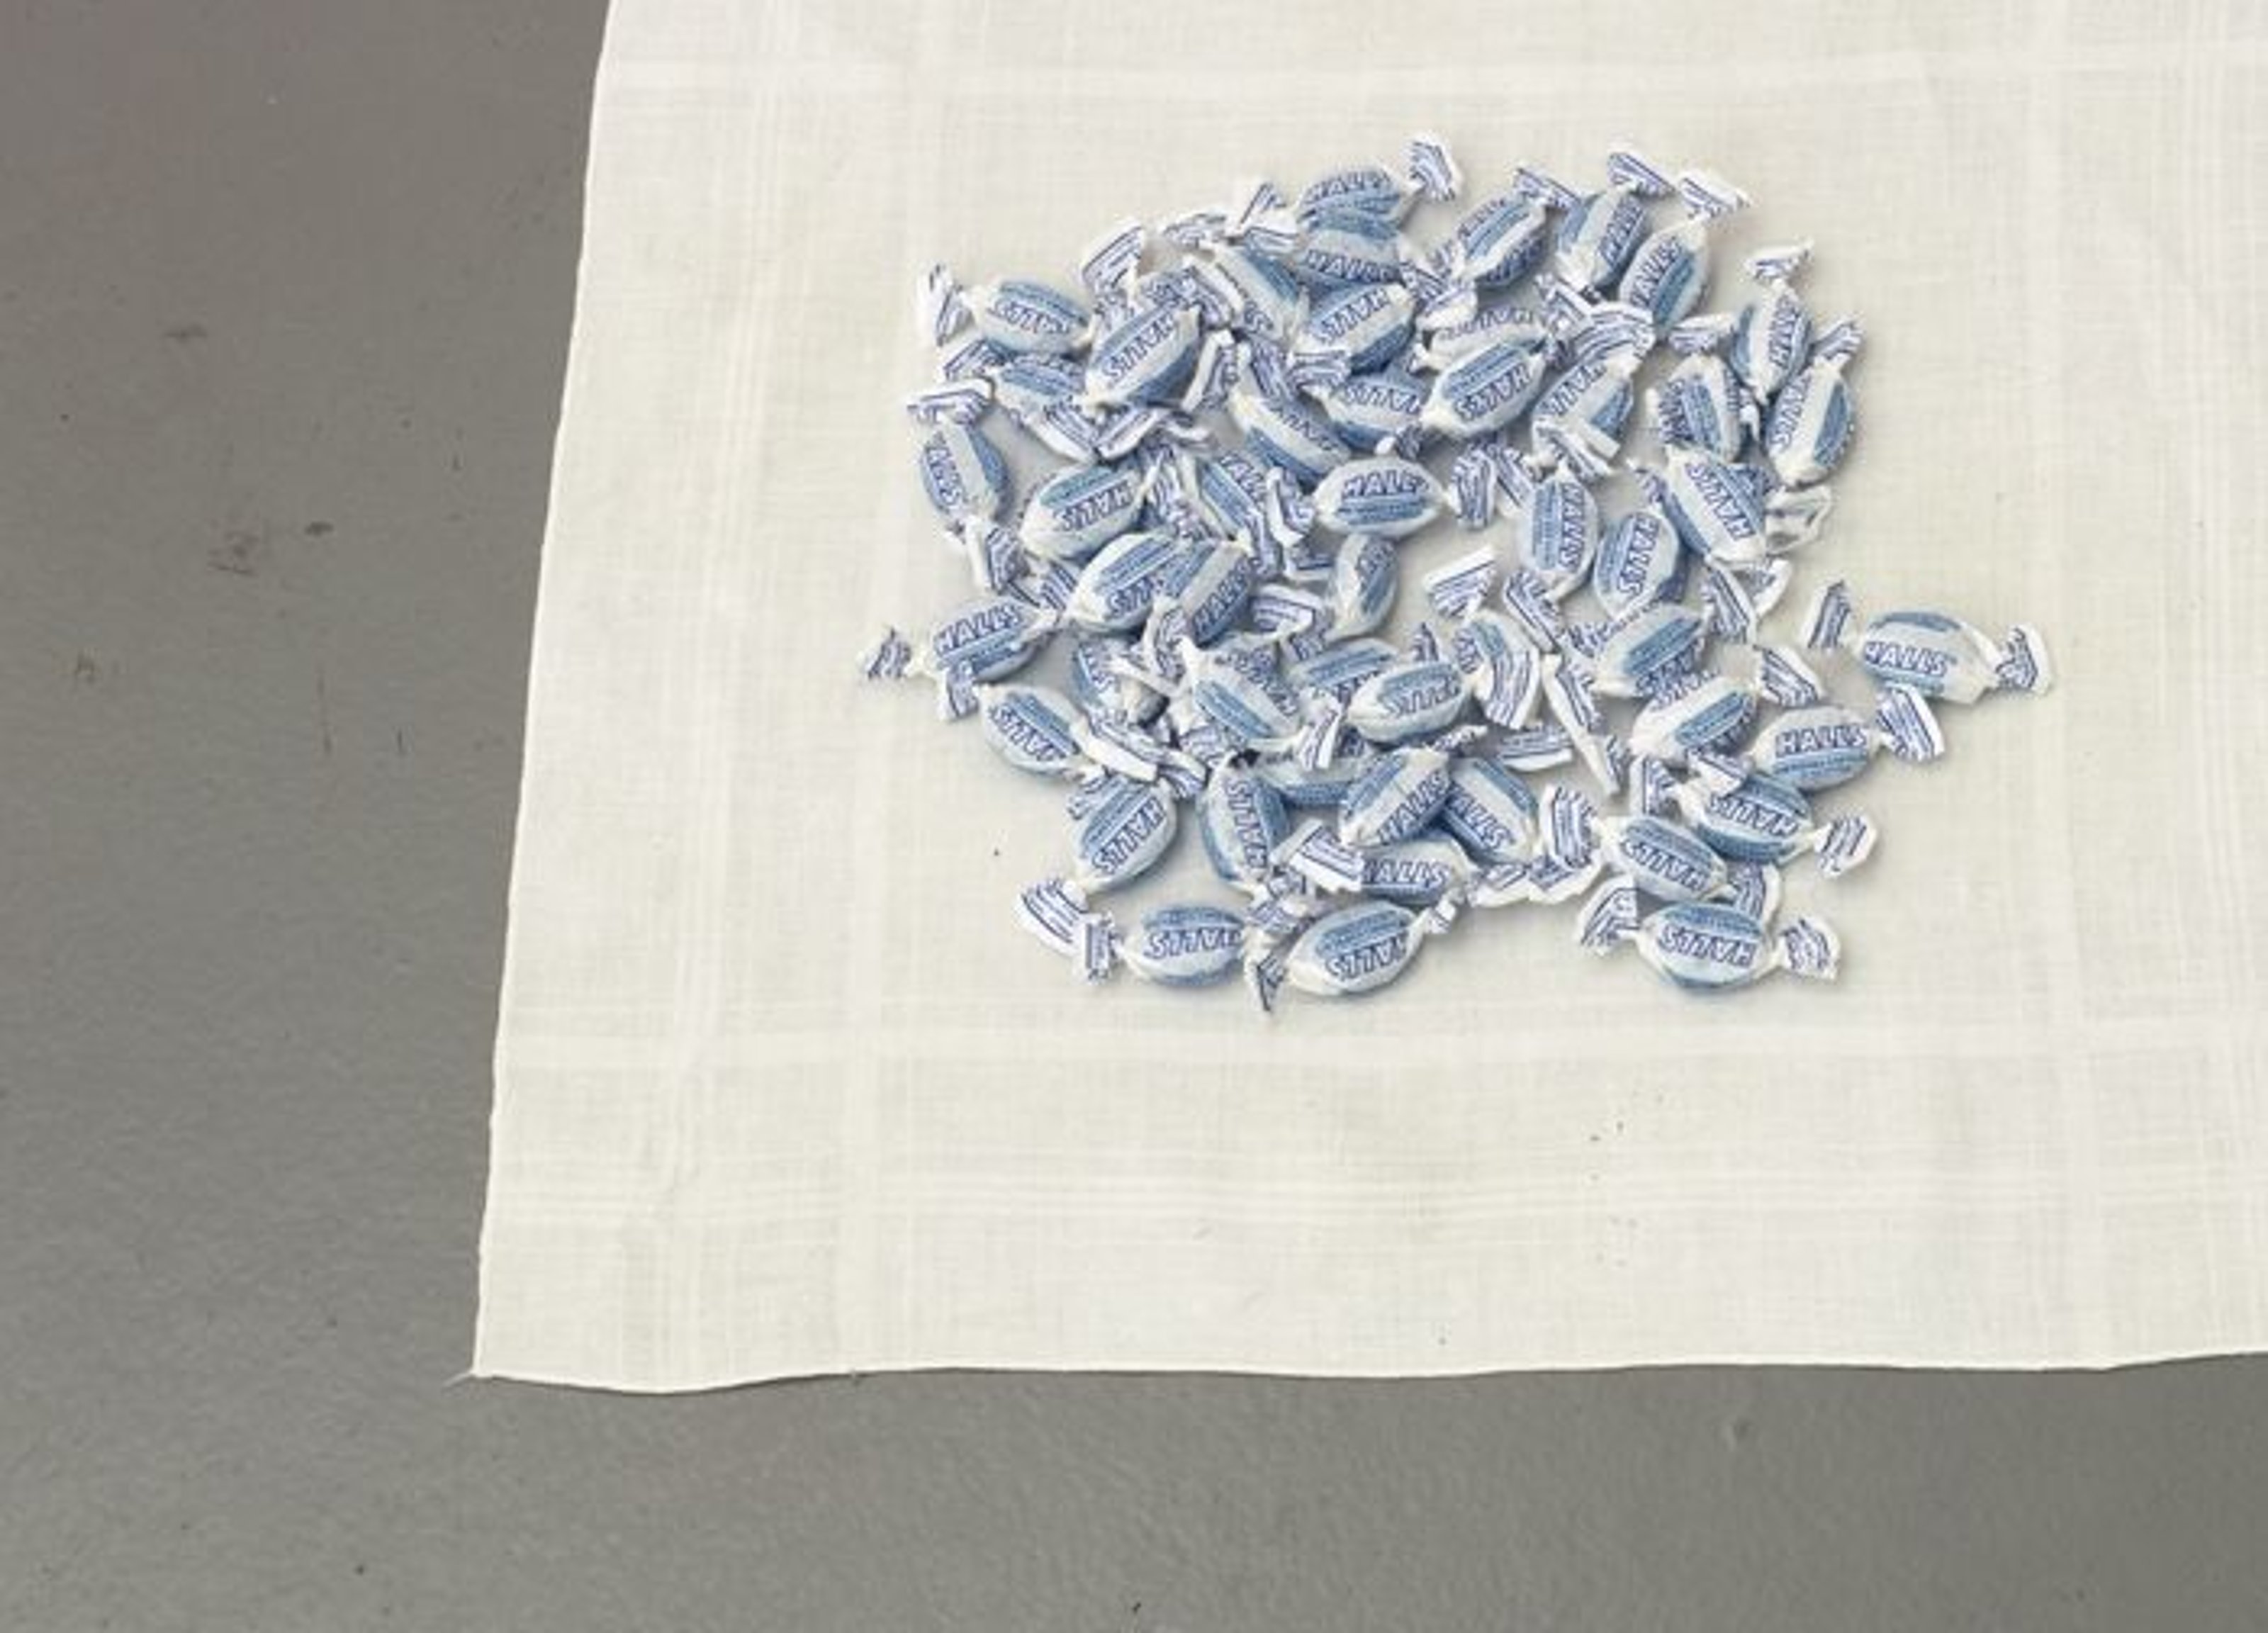 Cough drops placed on an handkerchief